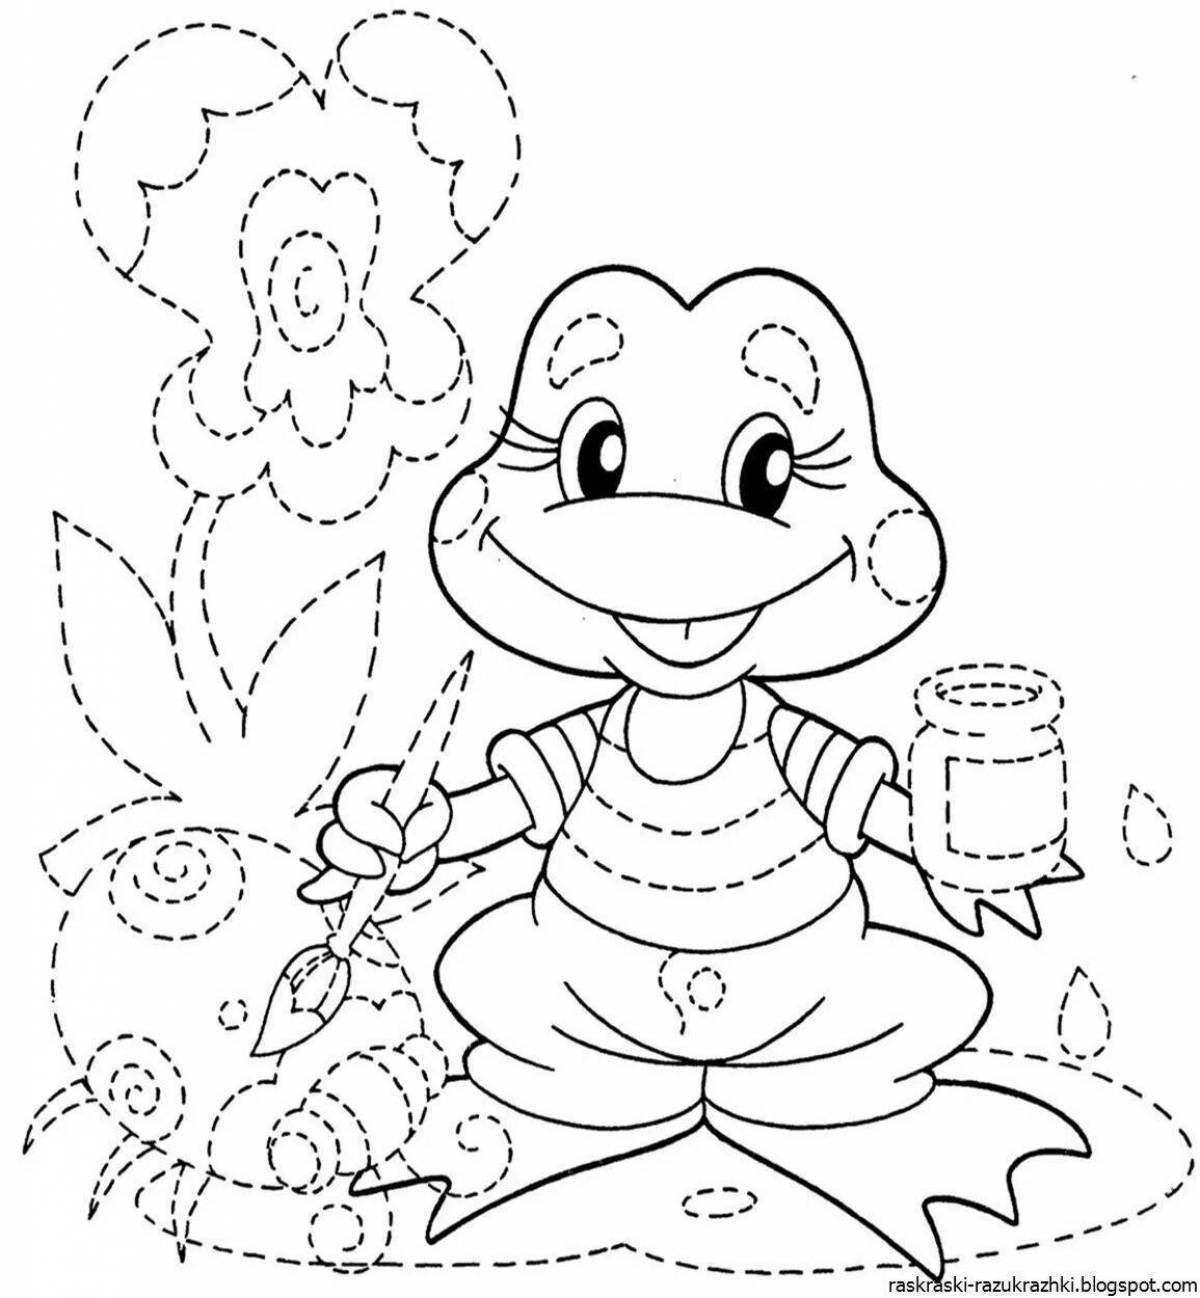 Creative coloring book for 6-7 year olds